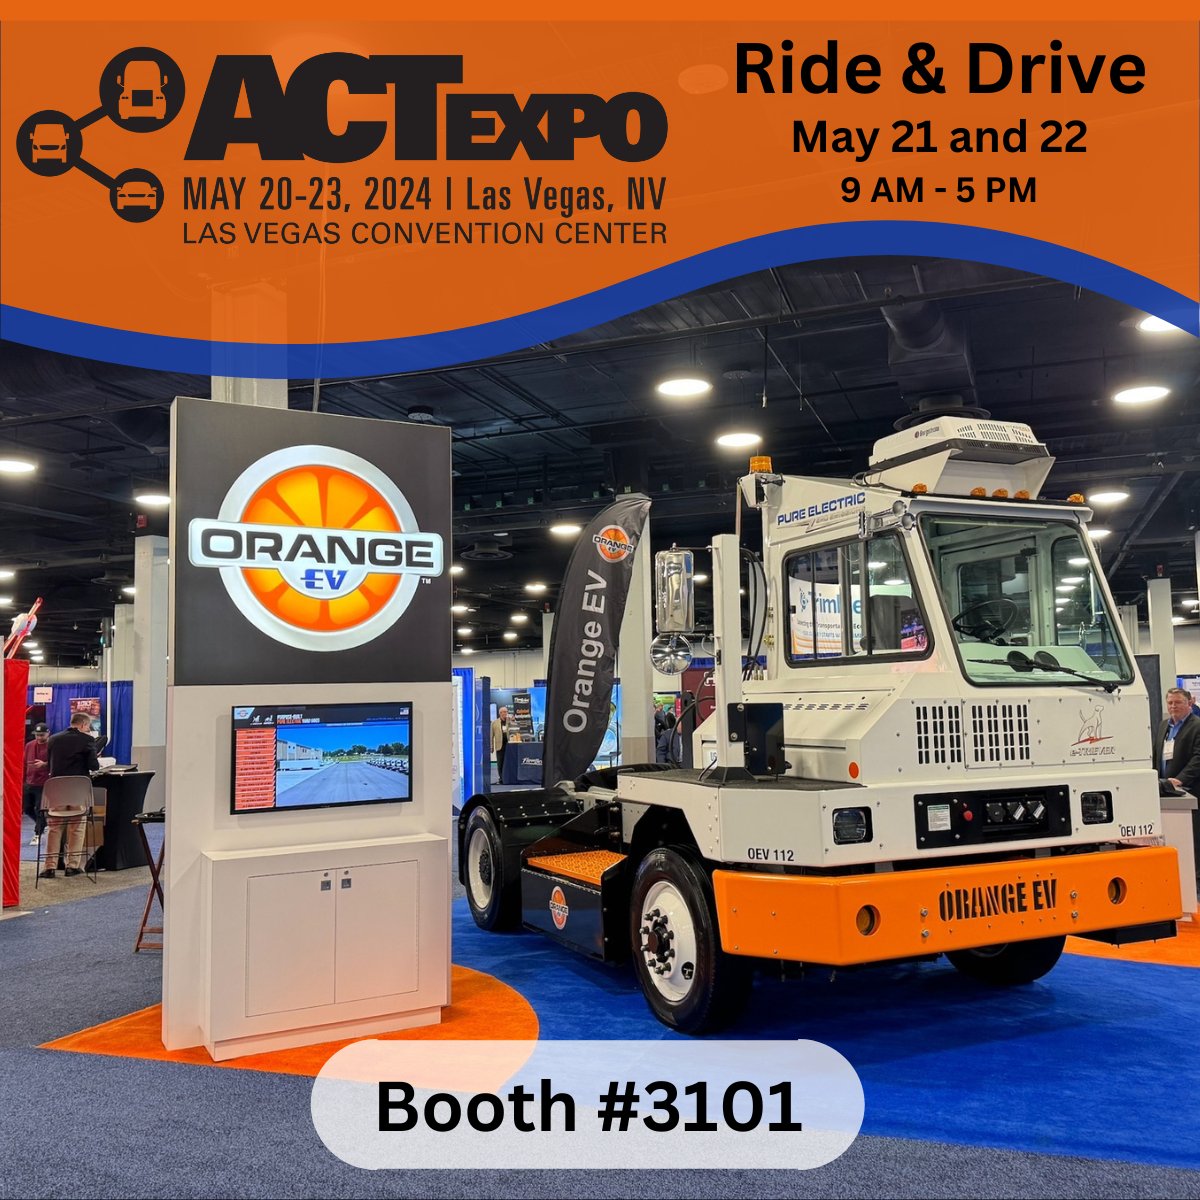 Join Orange EV May 20th-23rd in Vegas for ACT Expo 2024! Swing by Booth #3101 and tour our e-TRIEVER®, or take our purpose-built HUSK-e® for a spin at the Ride and Drive event! Follow the link to schedule a time to meet with the Orange EV team! orangeev.com/events/#events…